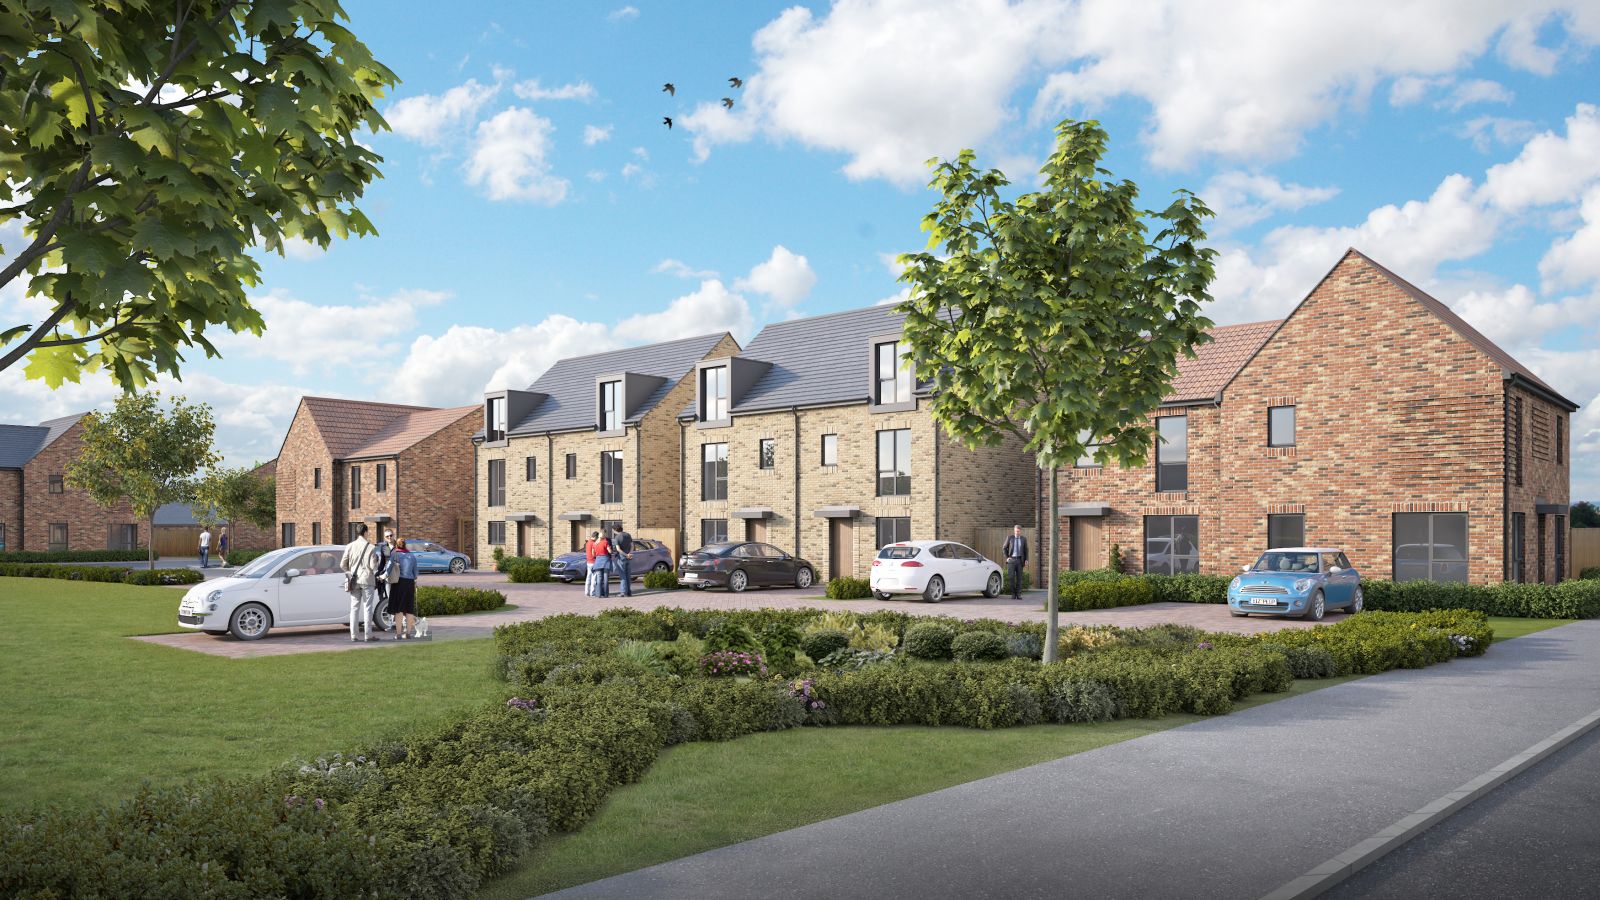 CGI of the Hillside Gardens development. Several 2 storey houses in a row with car park spaces and greenery in the foreground.